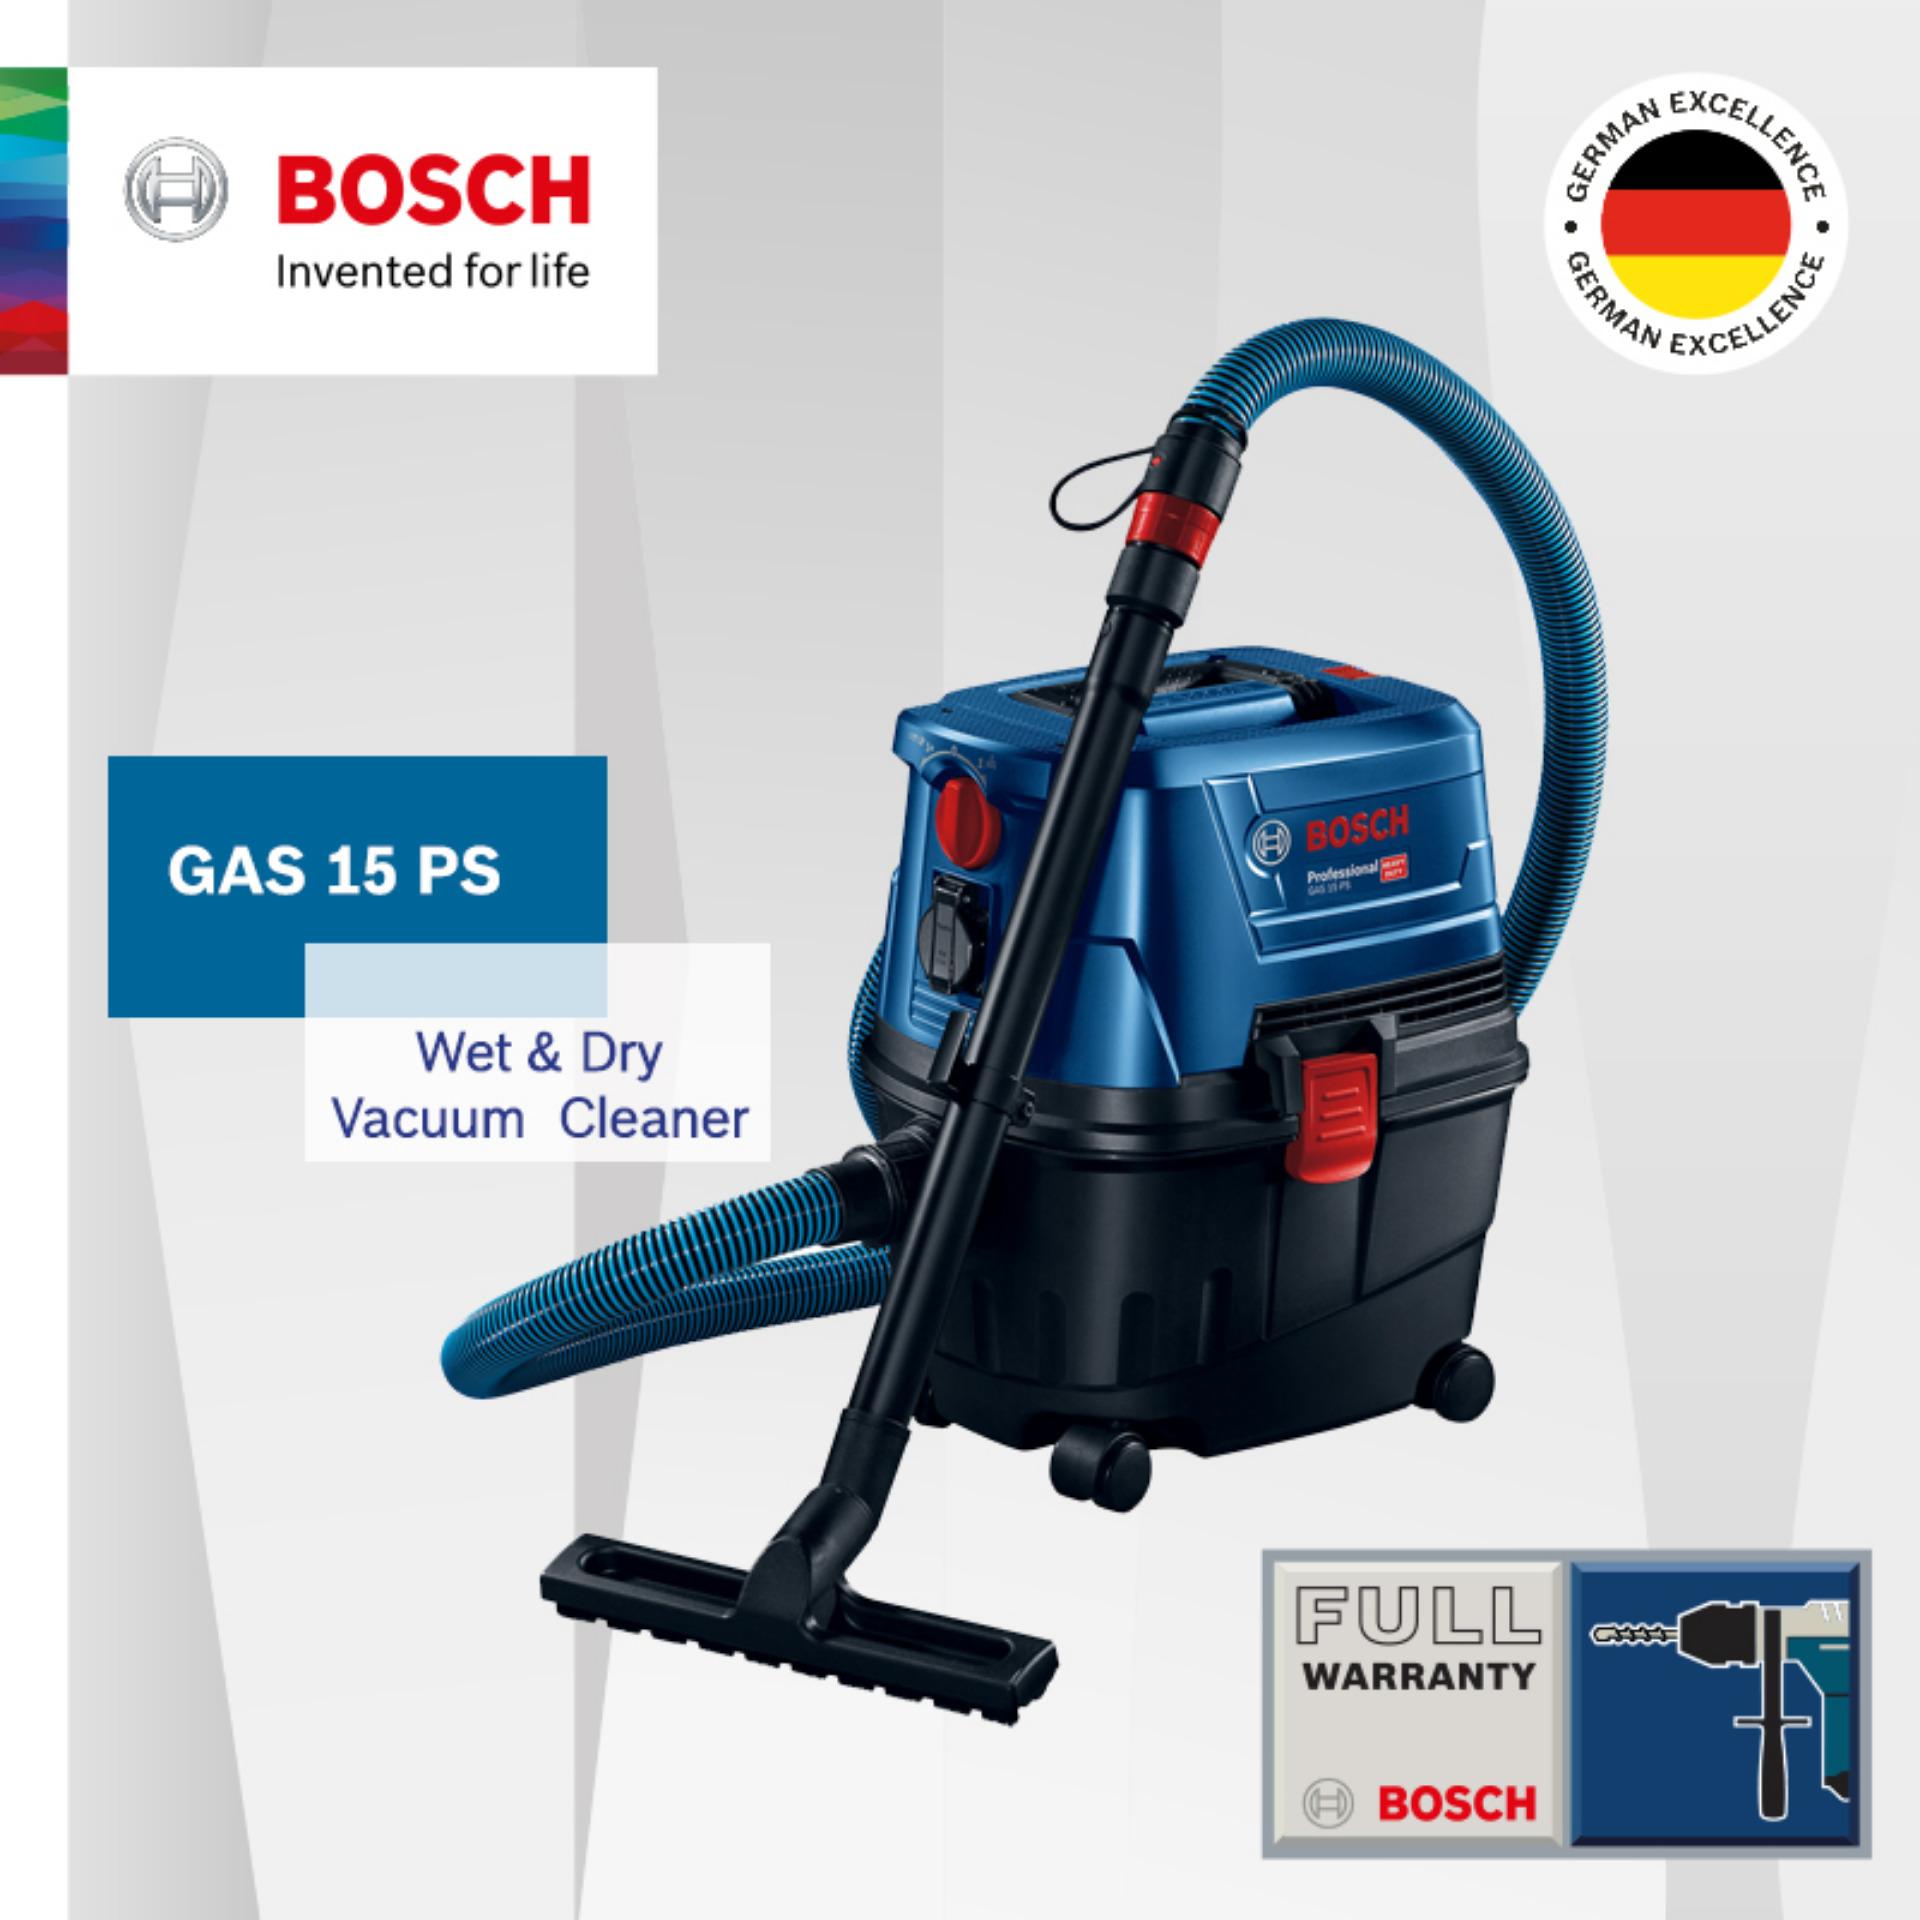  GAS 15 PS Wet & Dry Vacuum Cleaner with Blow and Suck function .